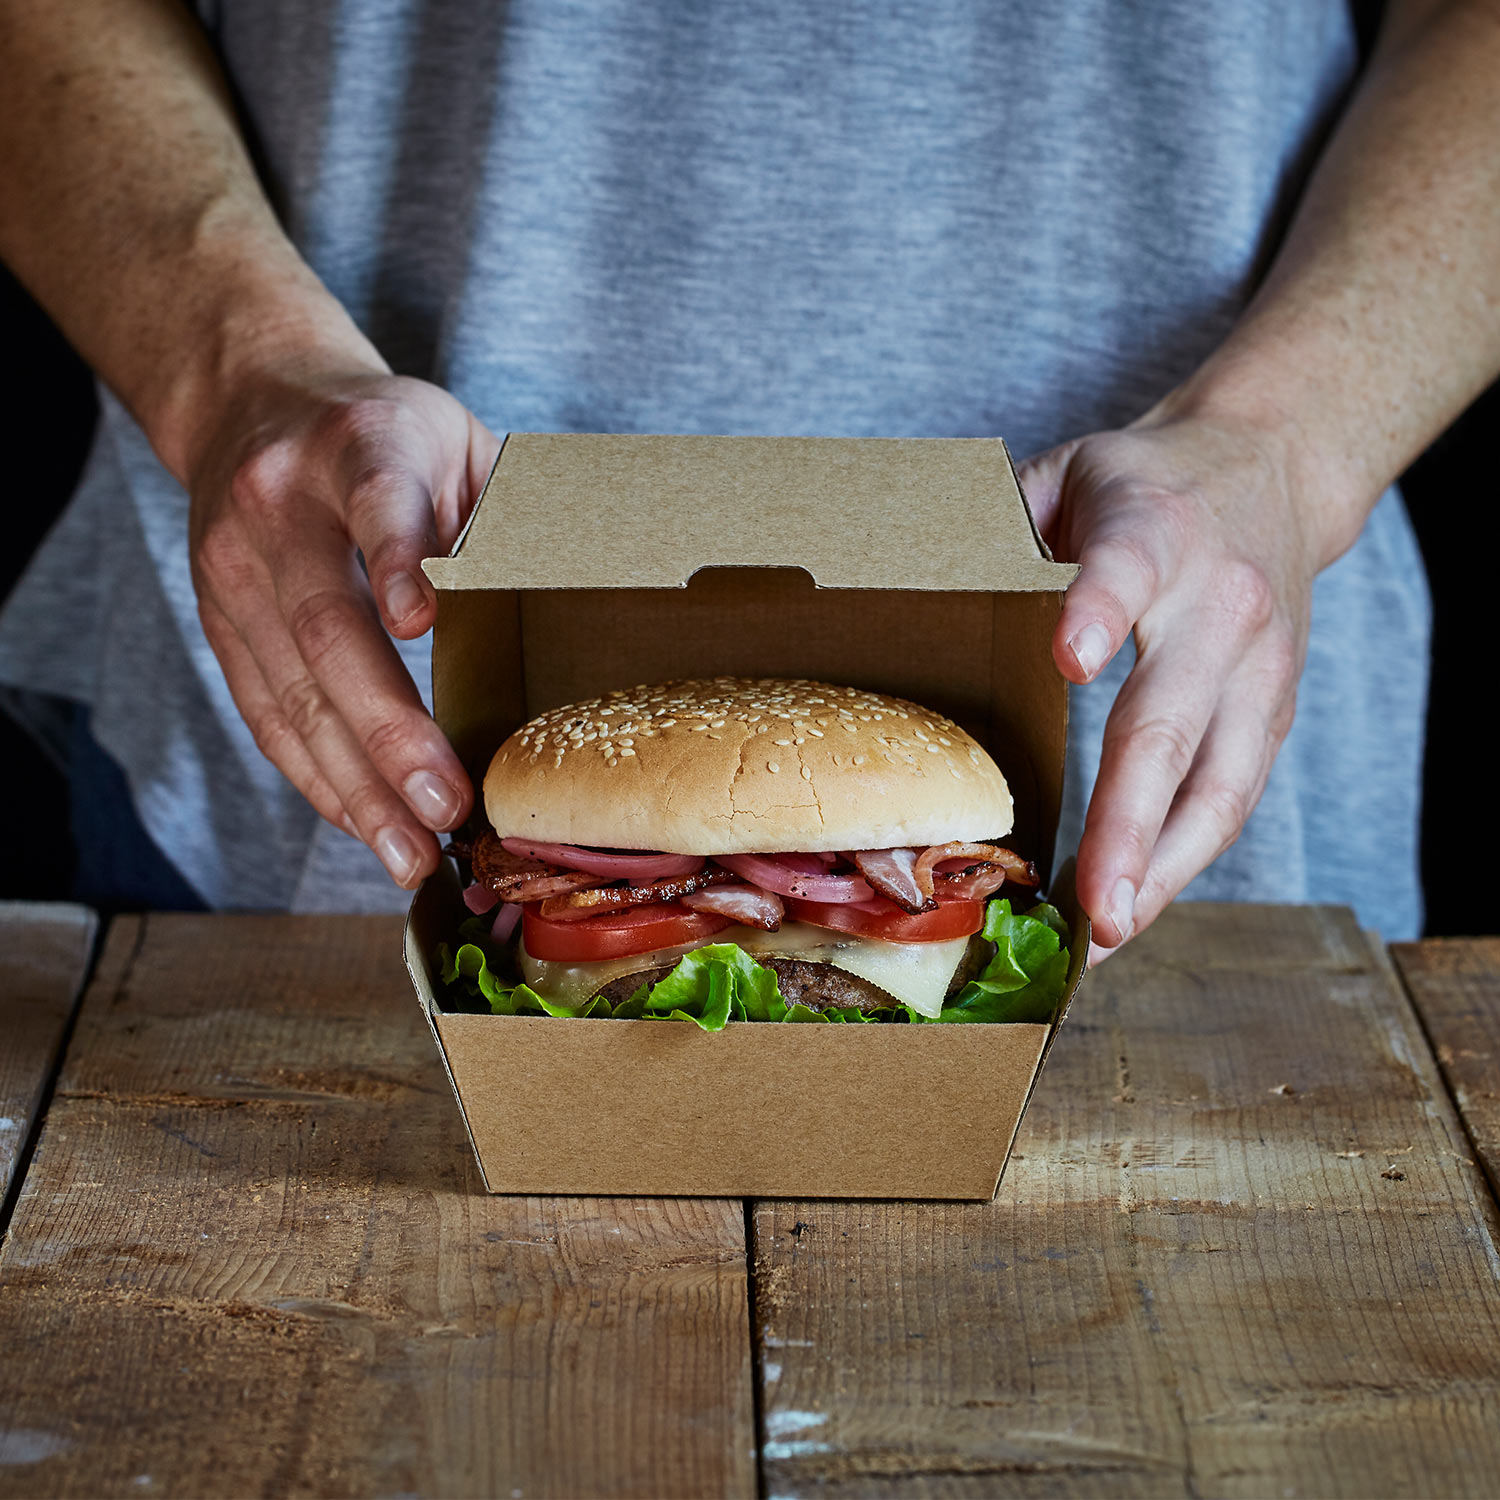 Image of recyclable burger carton